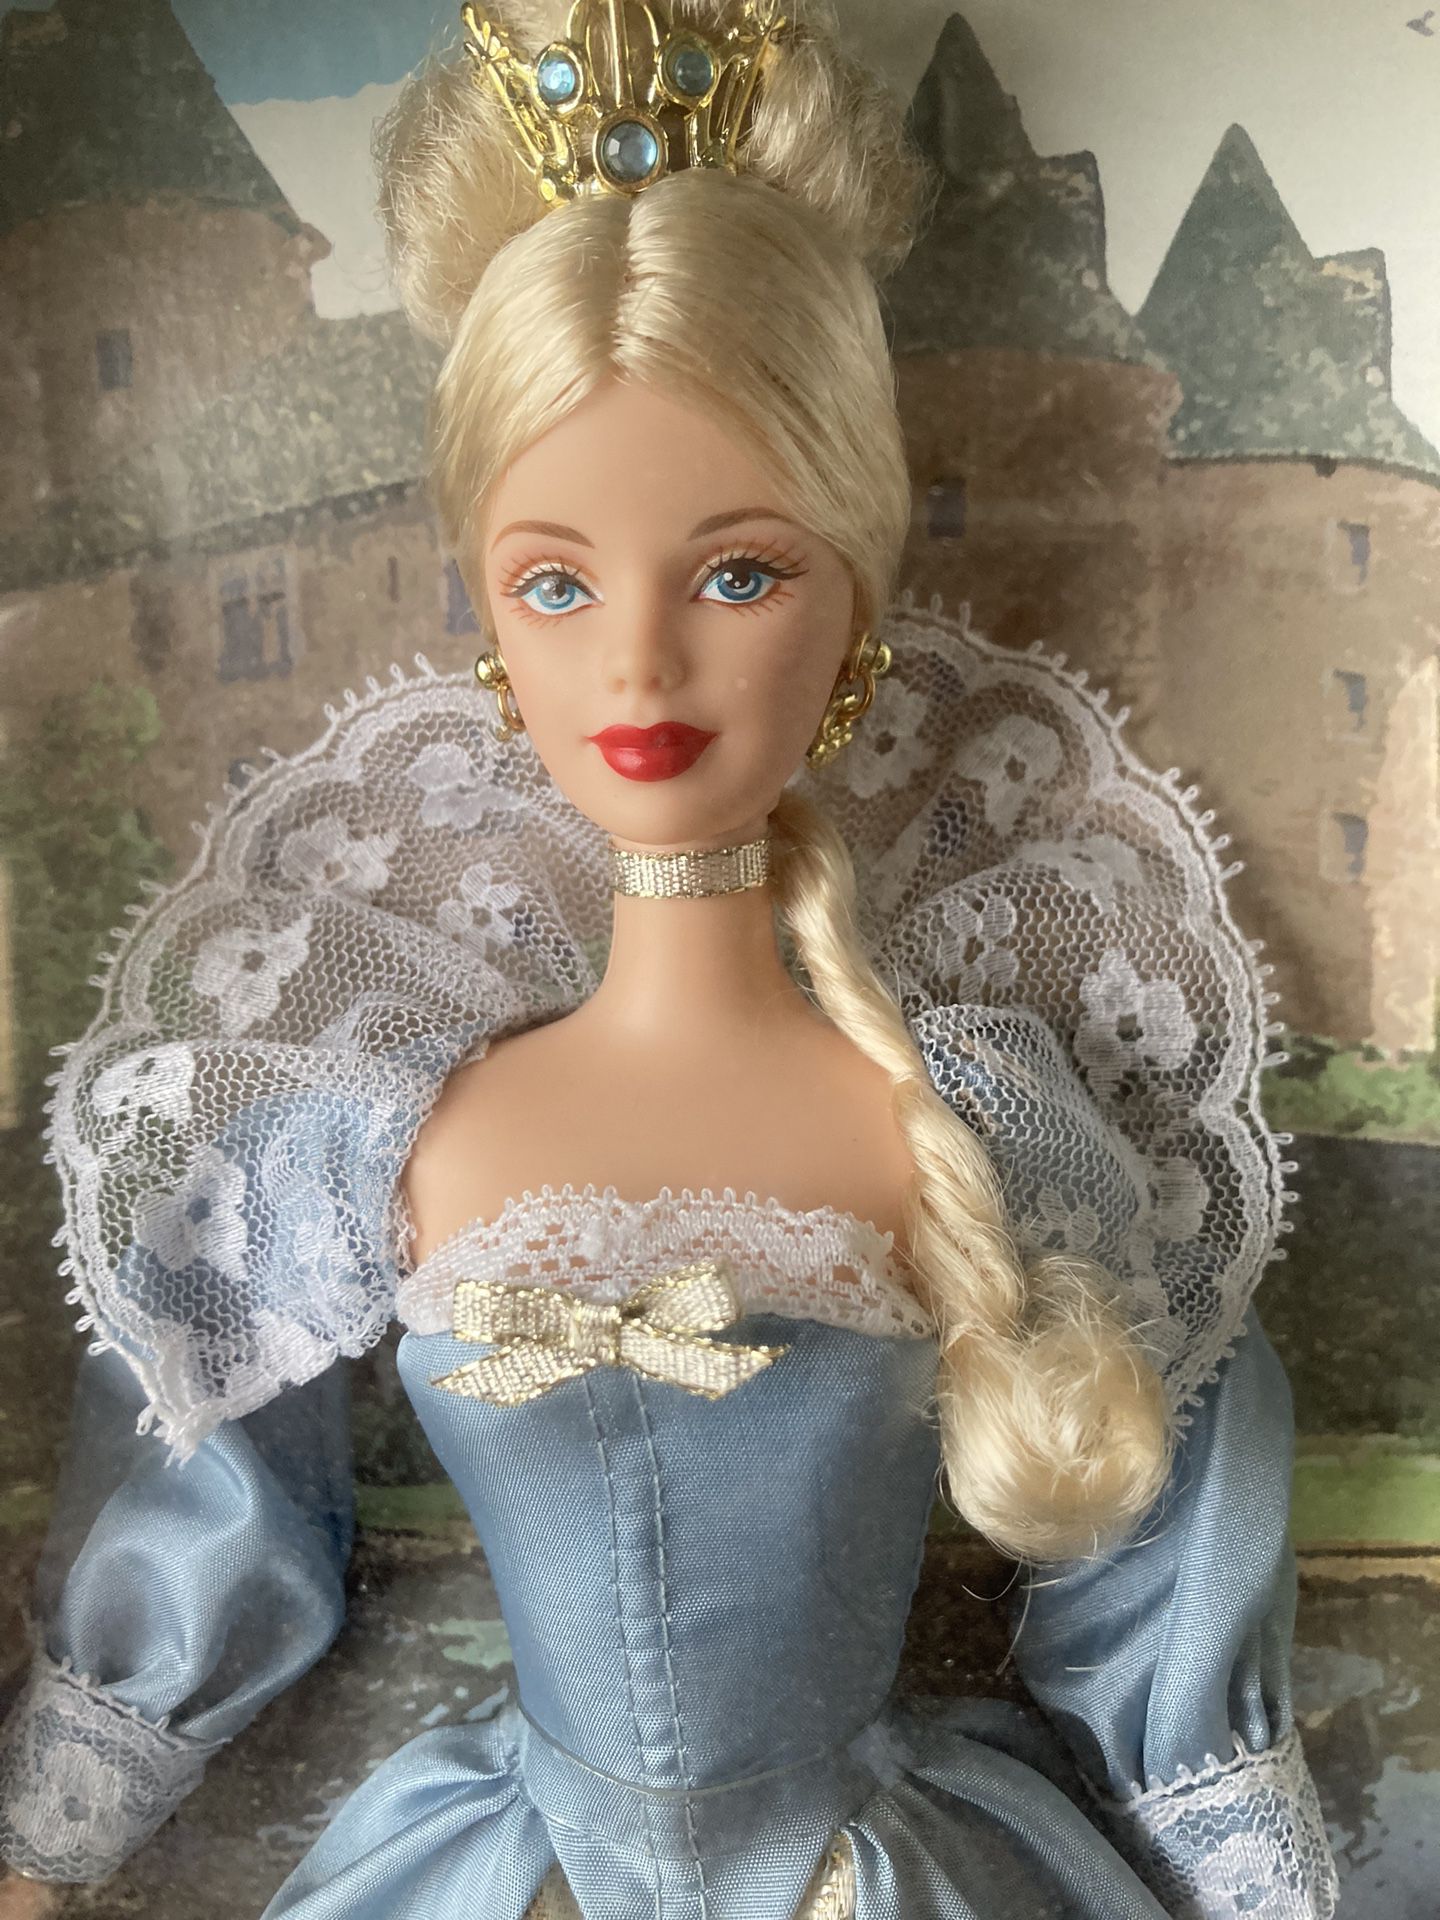 Reduced $ Collectors Barbie Doll princess of Danish court